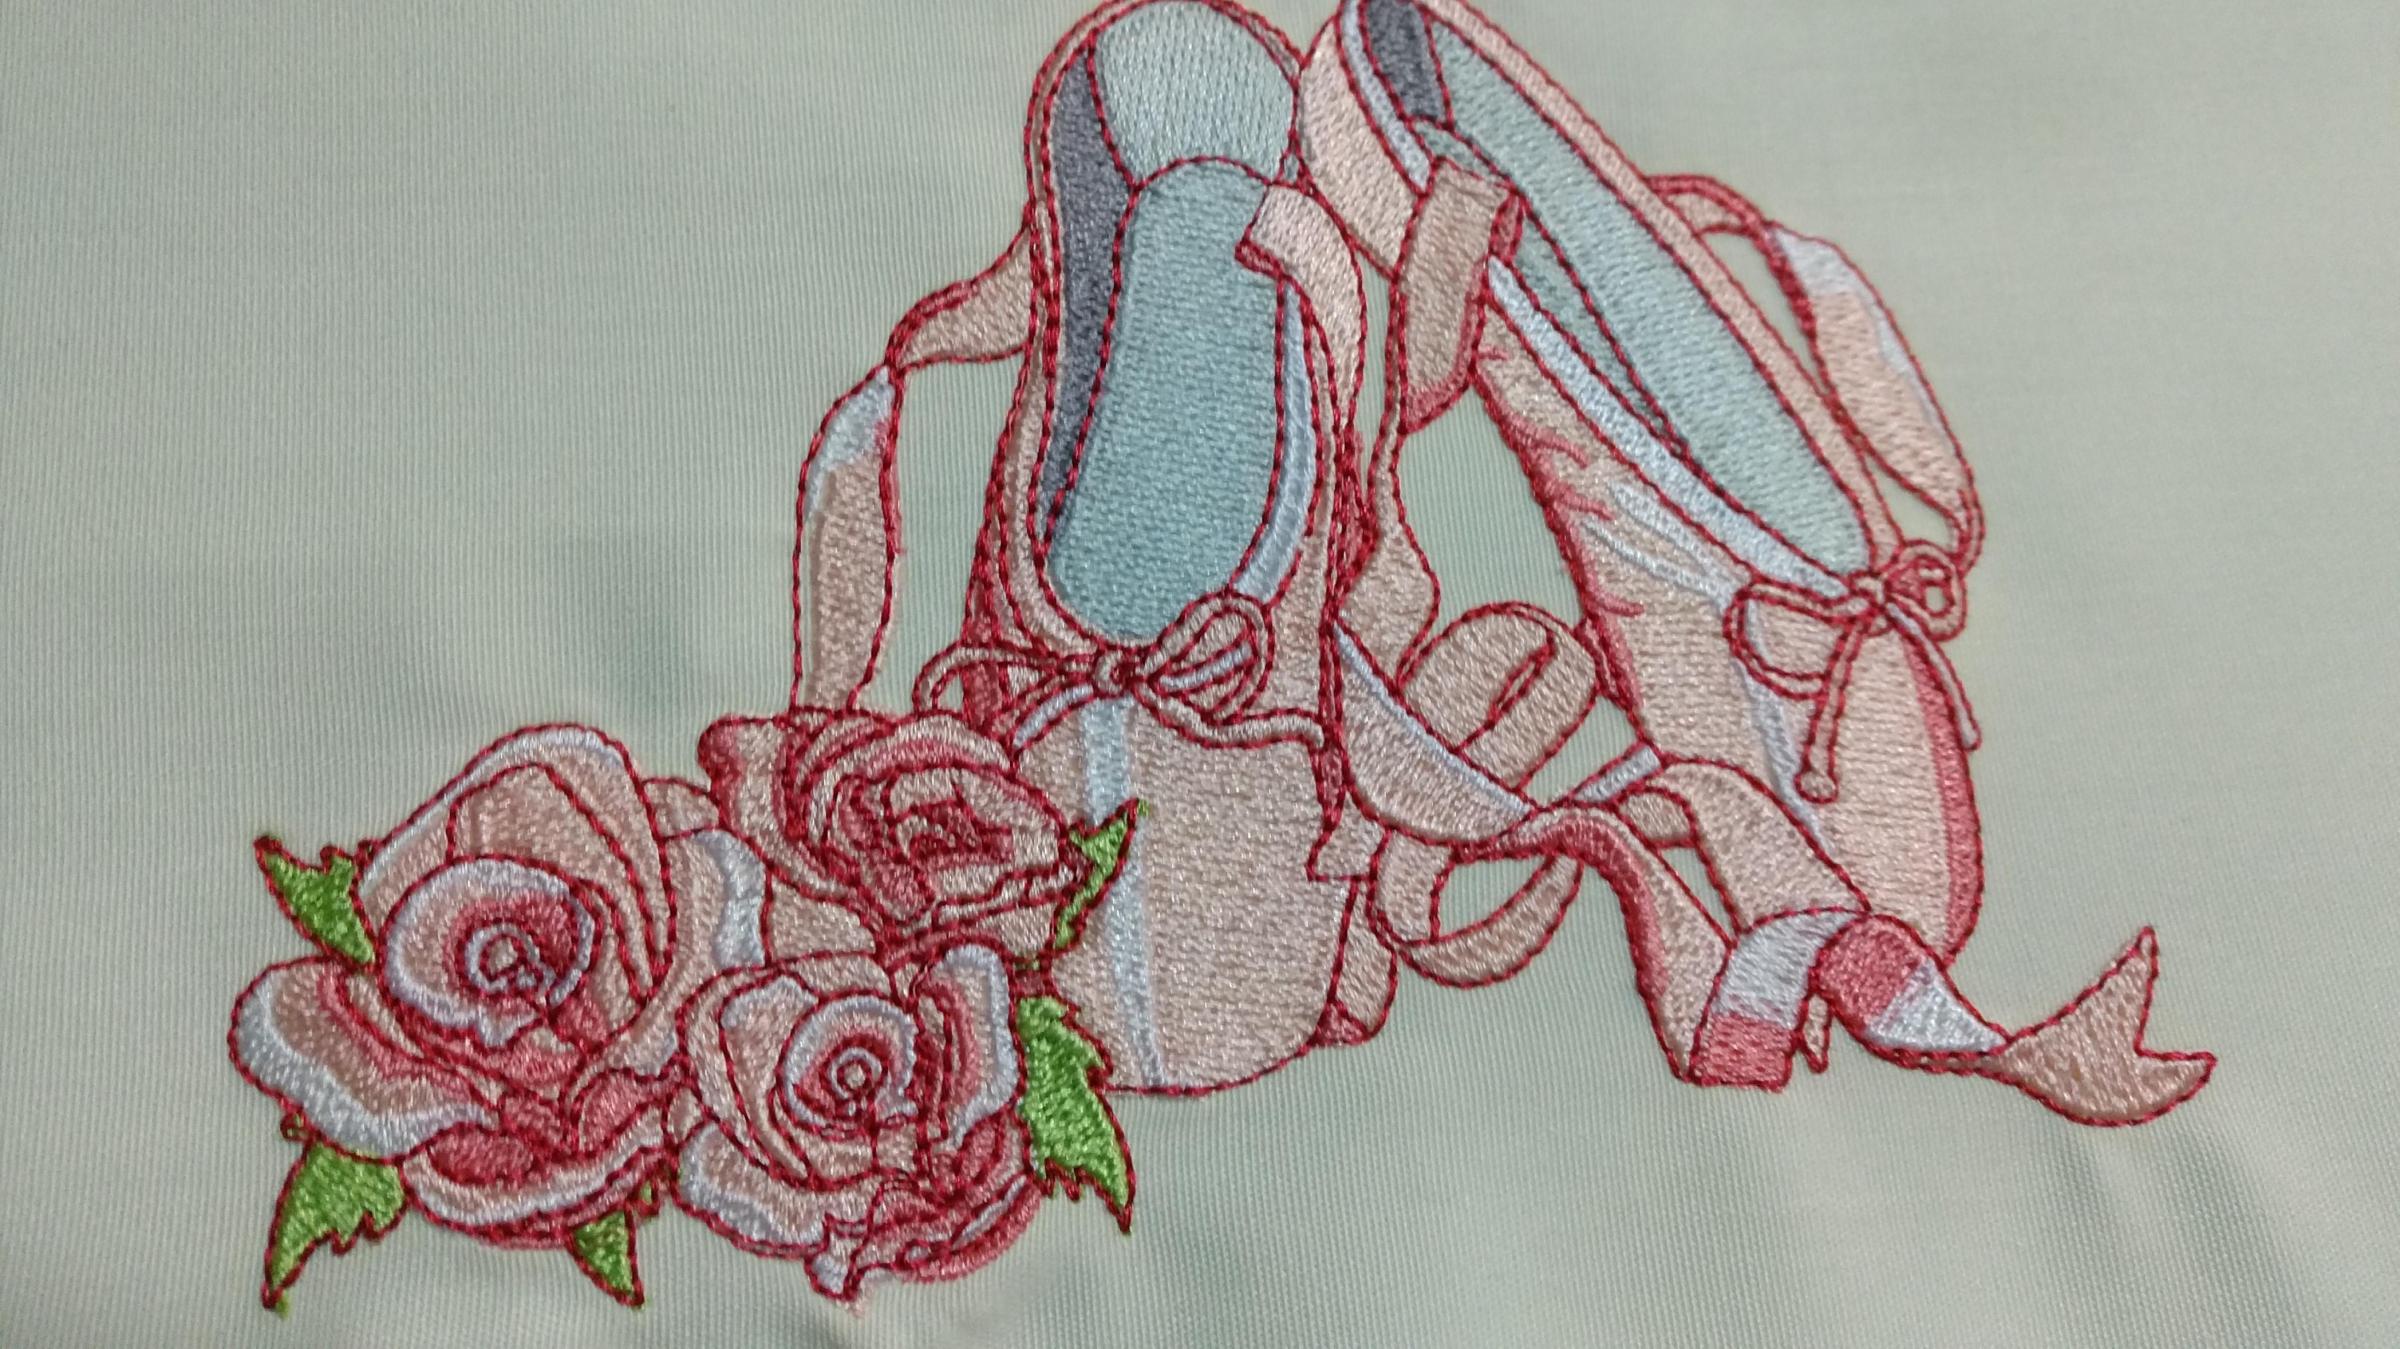 Ballet shoes and roses embroidery design - Woman's embroidery 